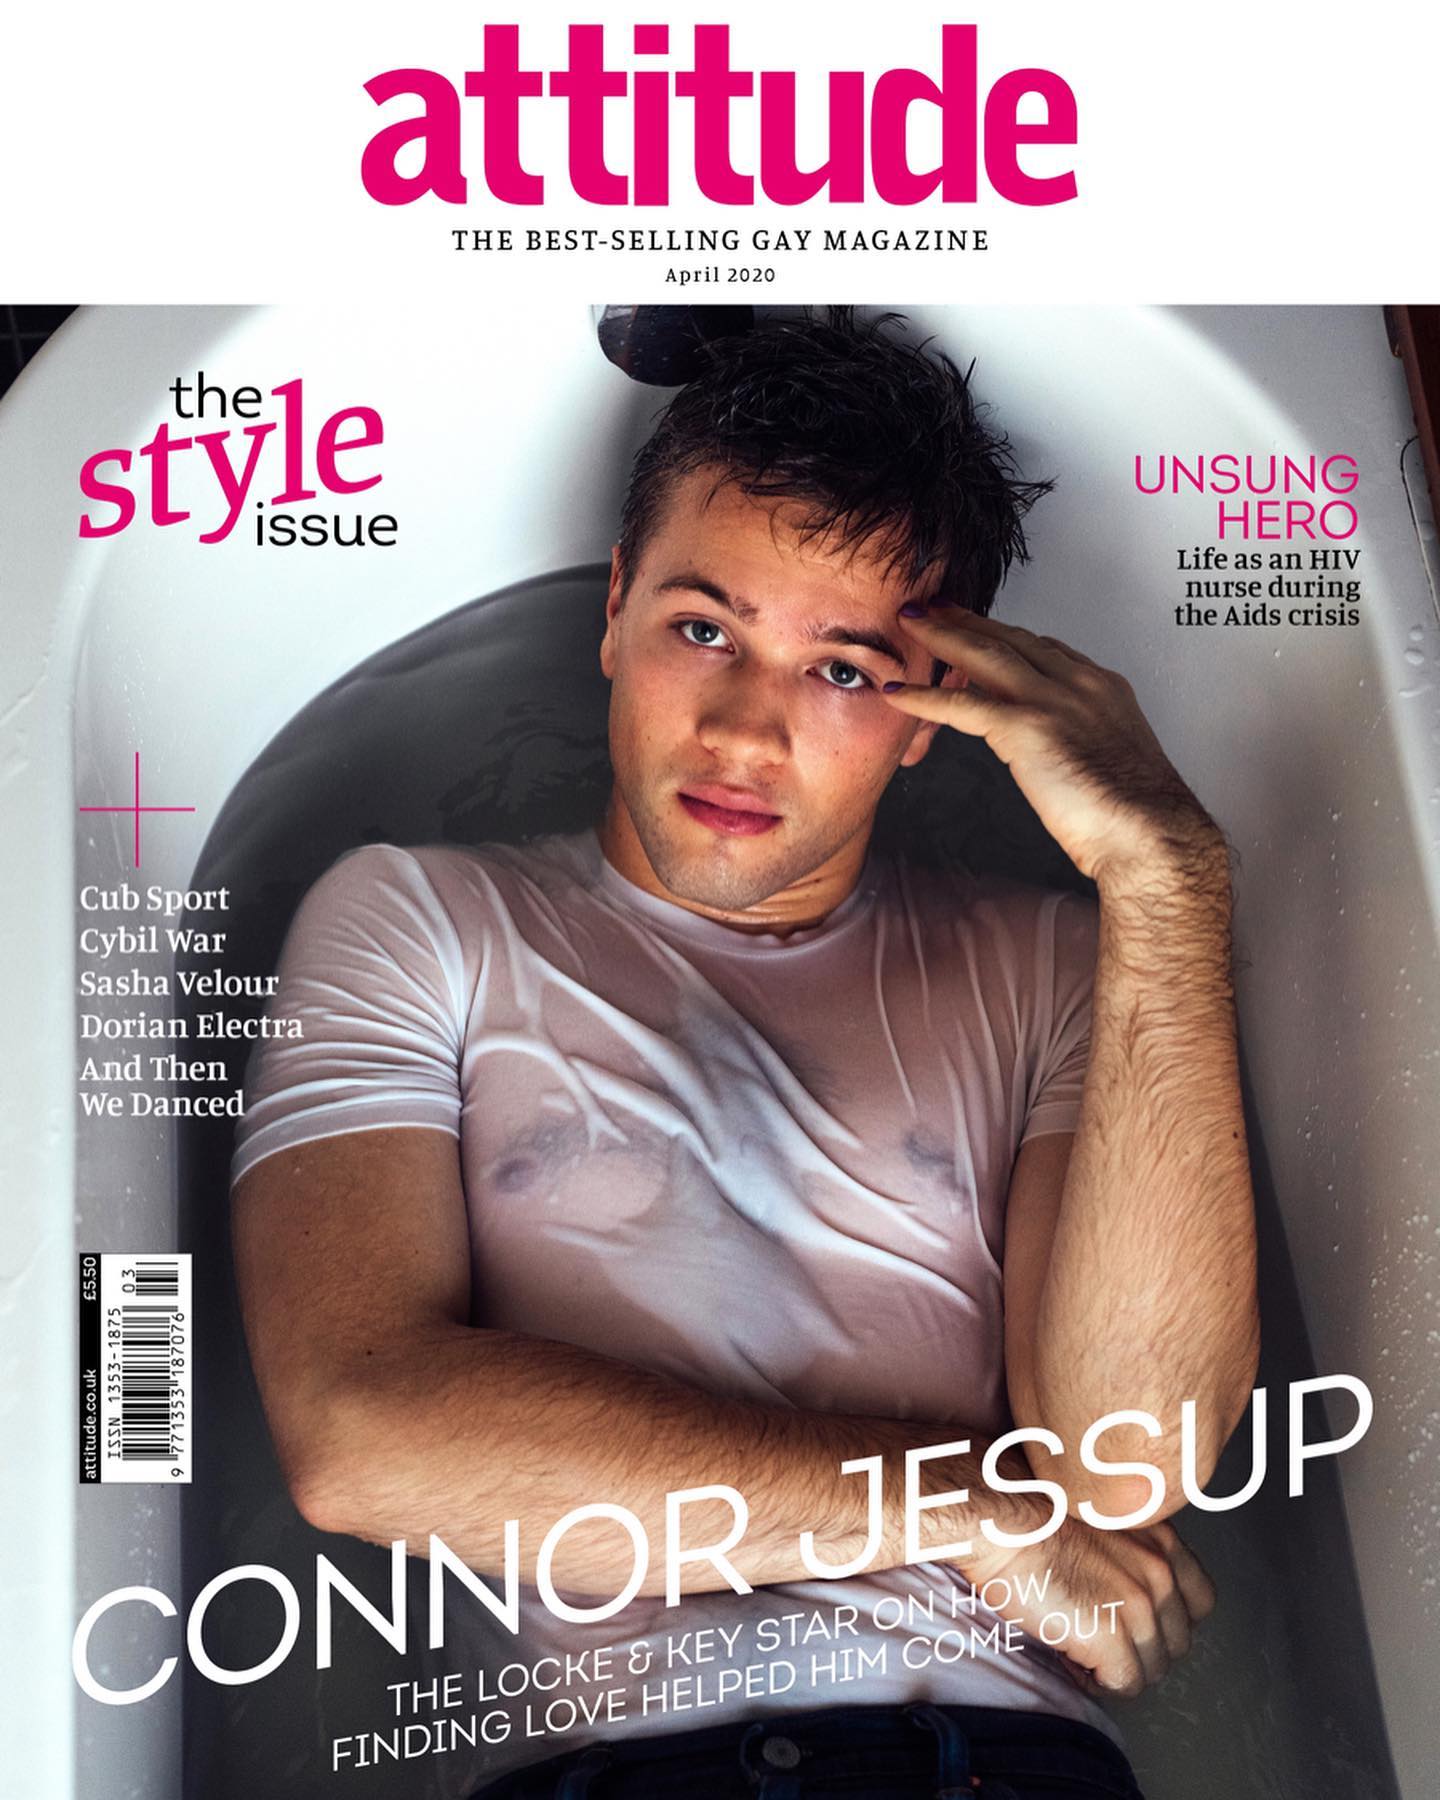 Connor Jessup on the cover of Attitude magazine